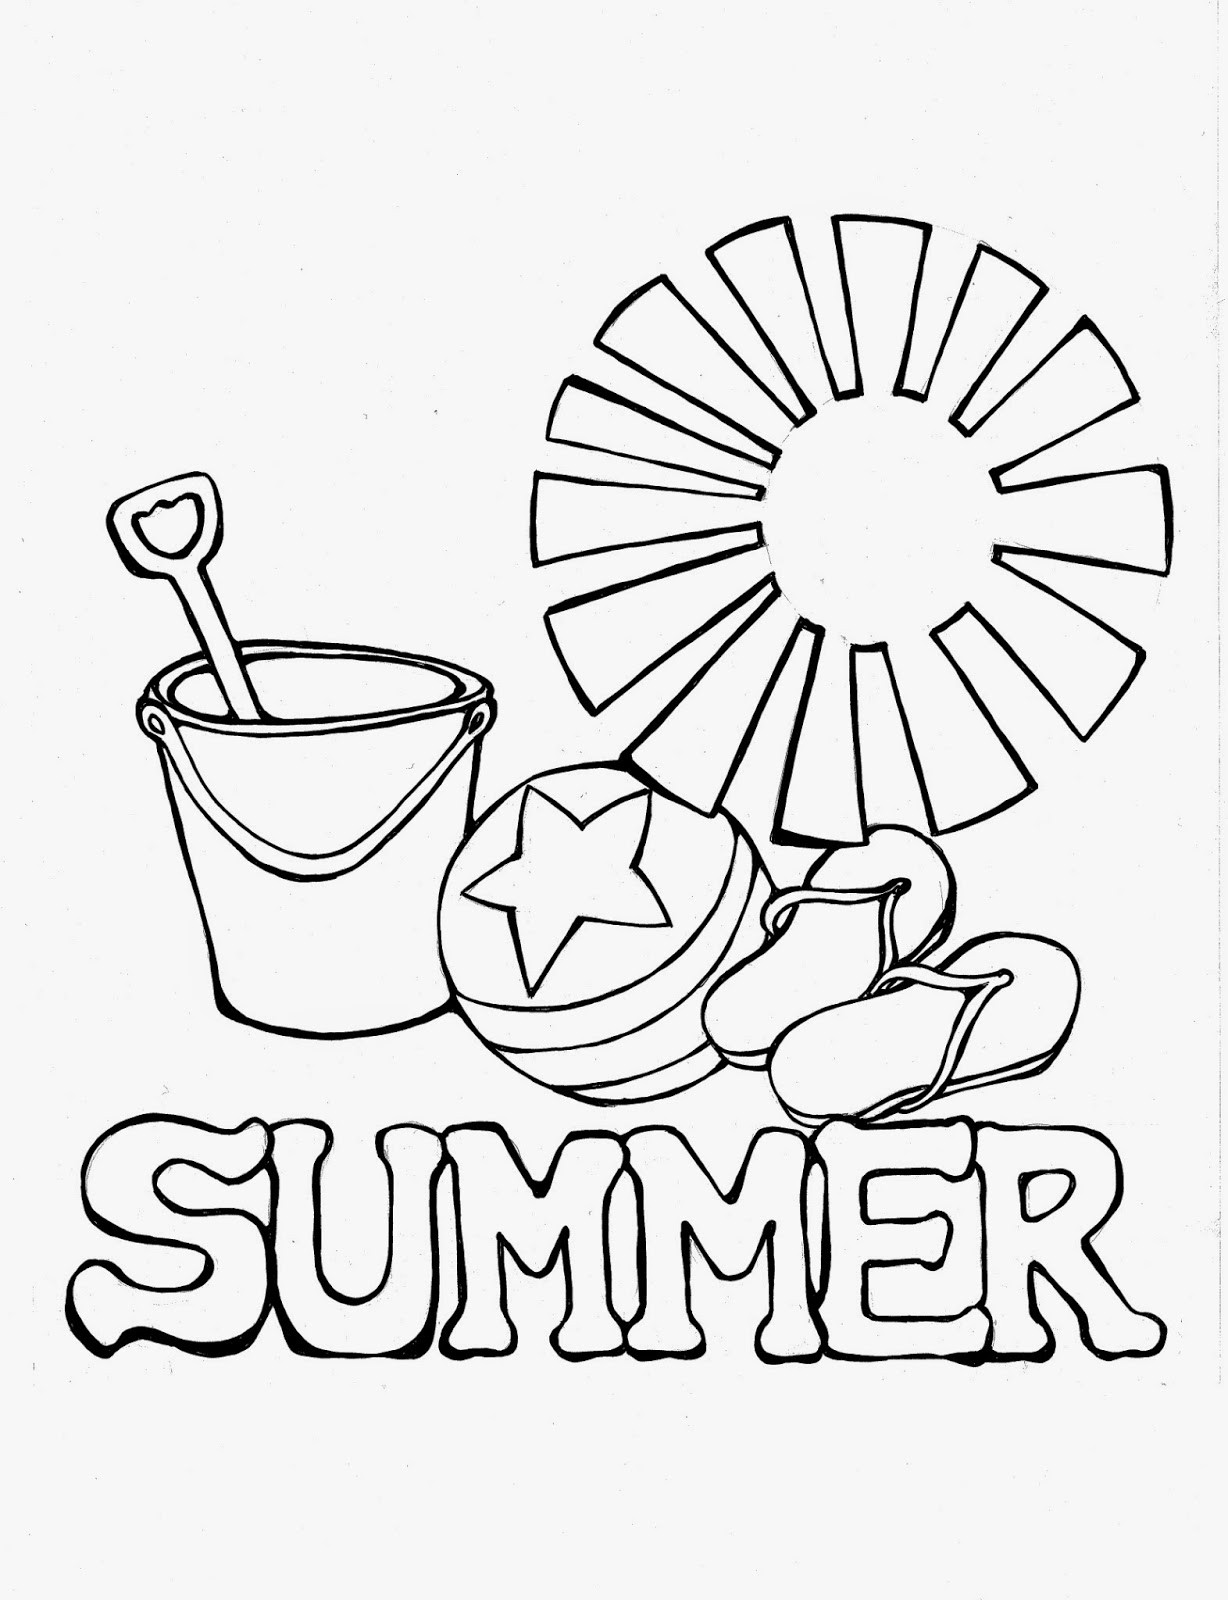 Summer Coloring Pages For Kids
 